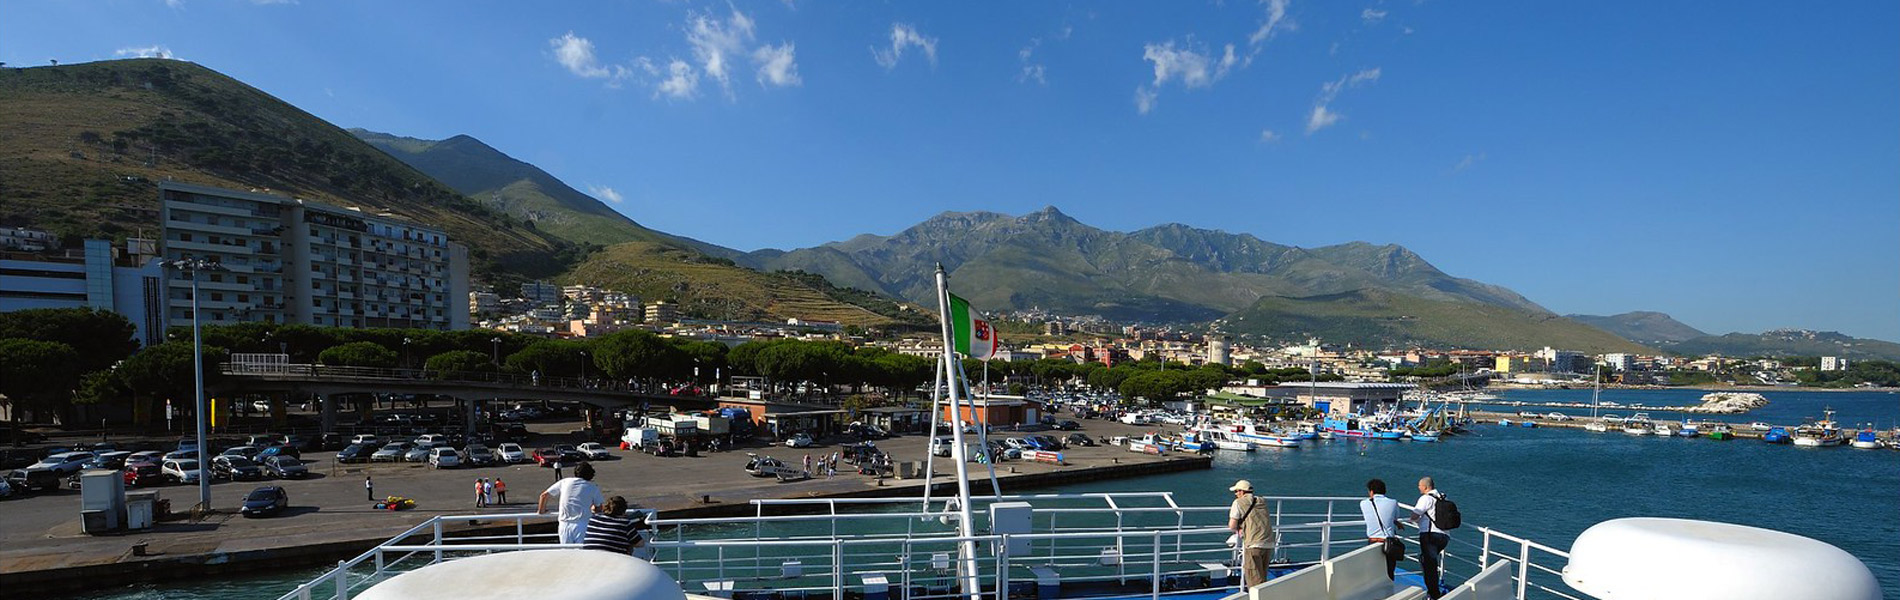 The port of Formia seen from the ferry